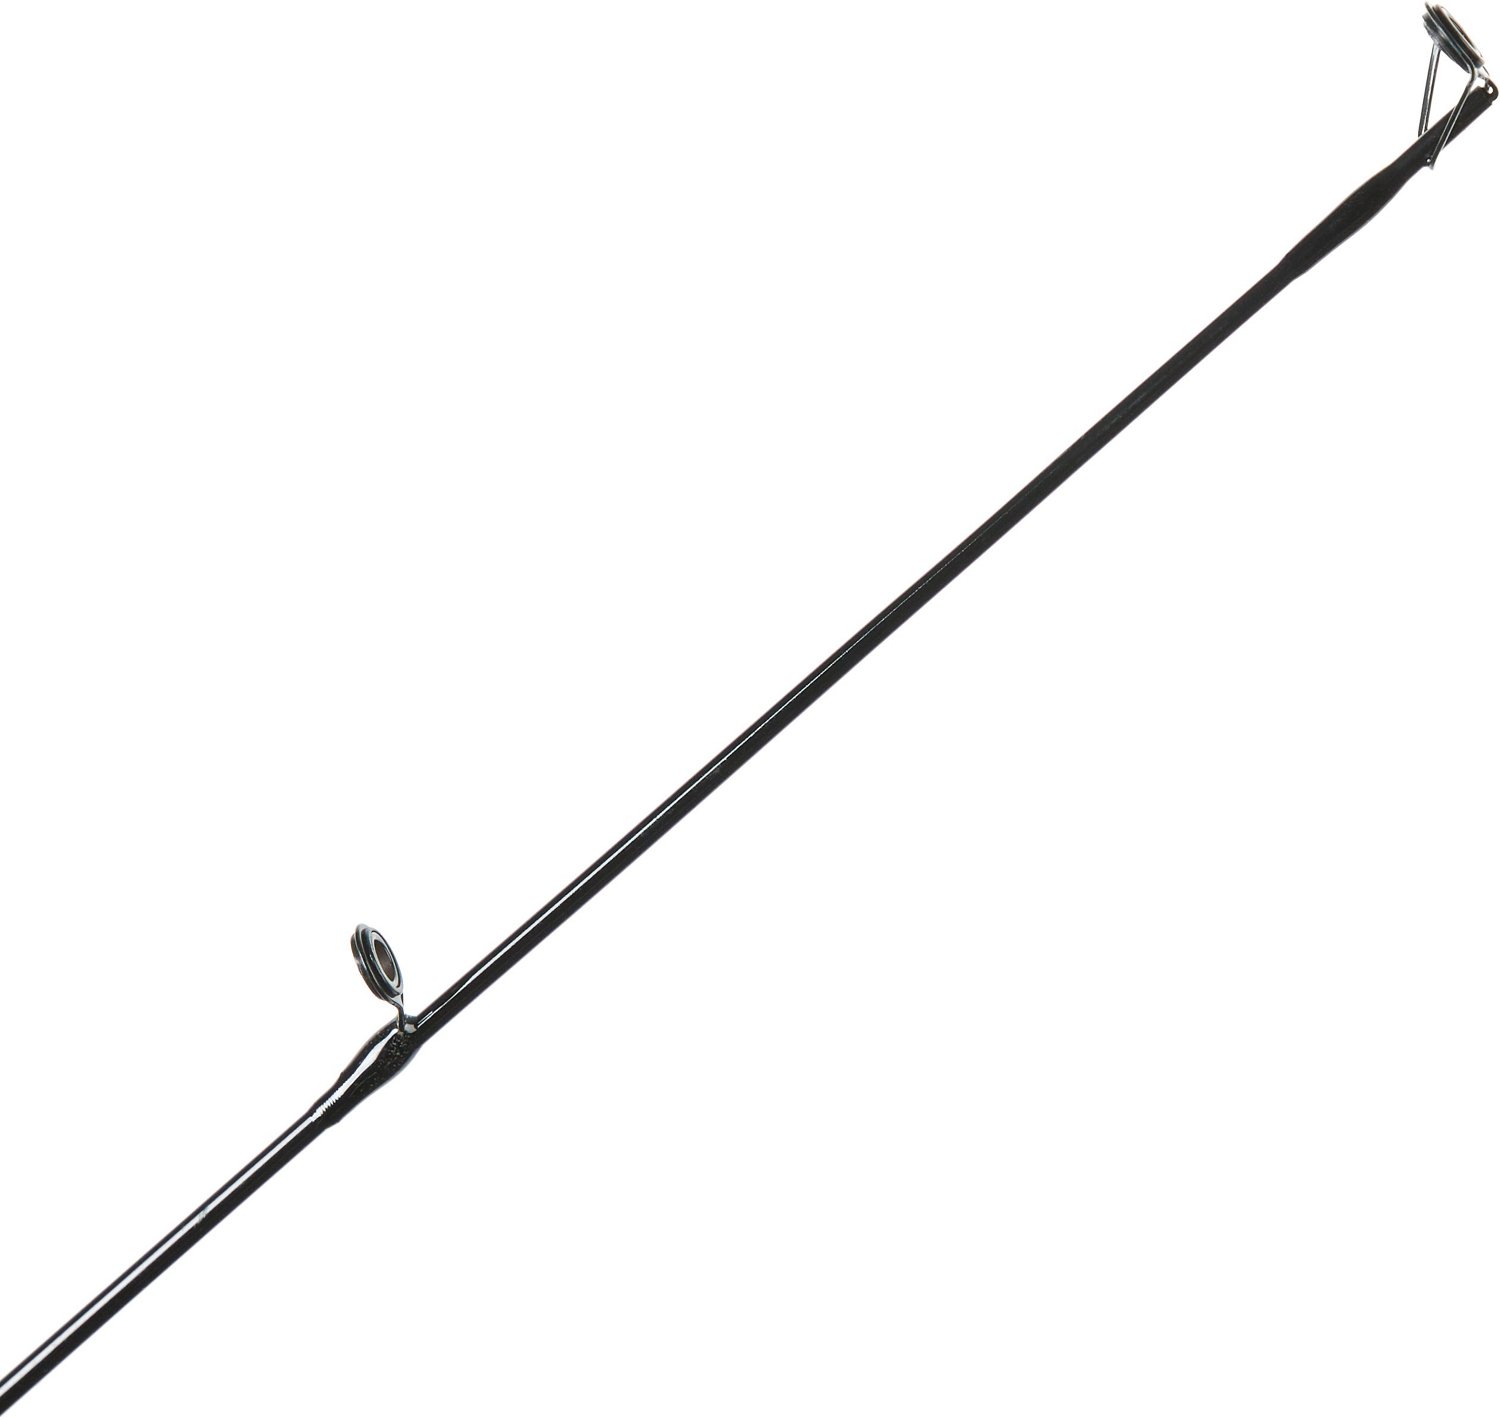 Wondering can I use a zebco 404 rod/reel combo for small bass : r